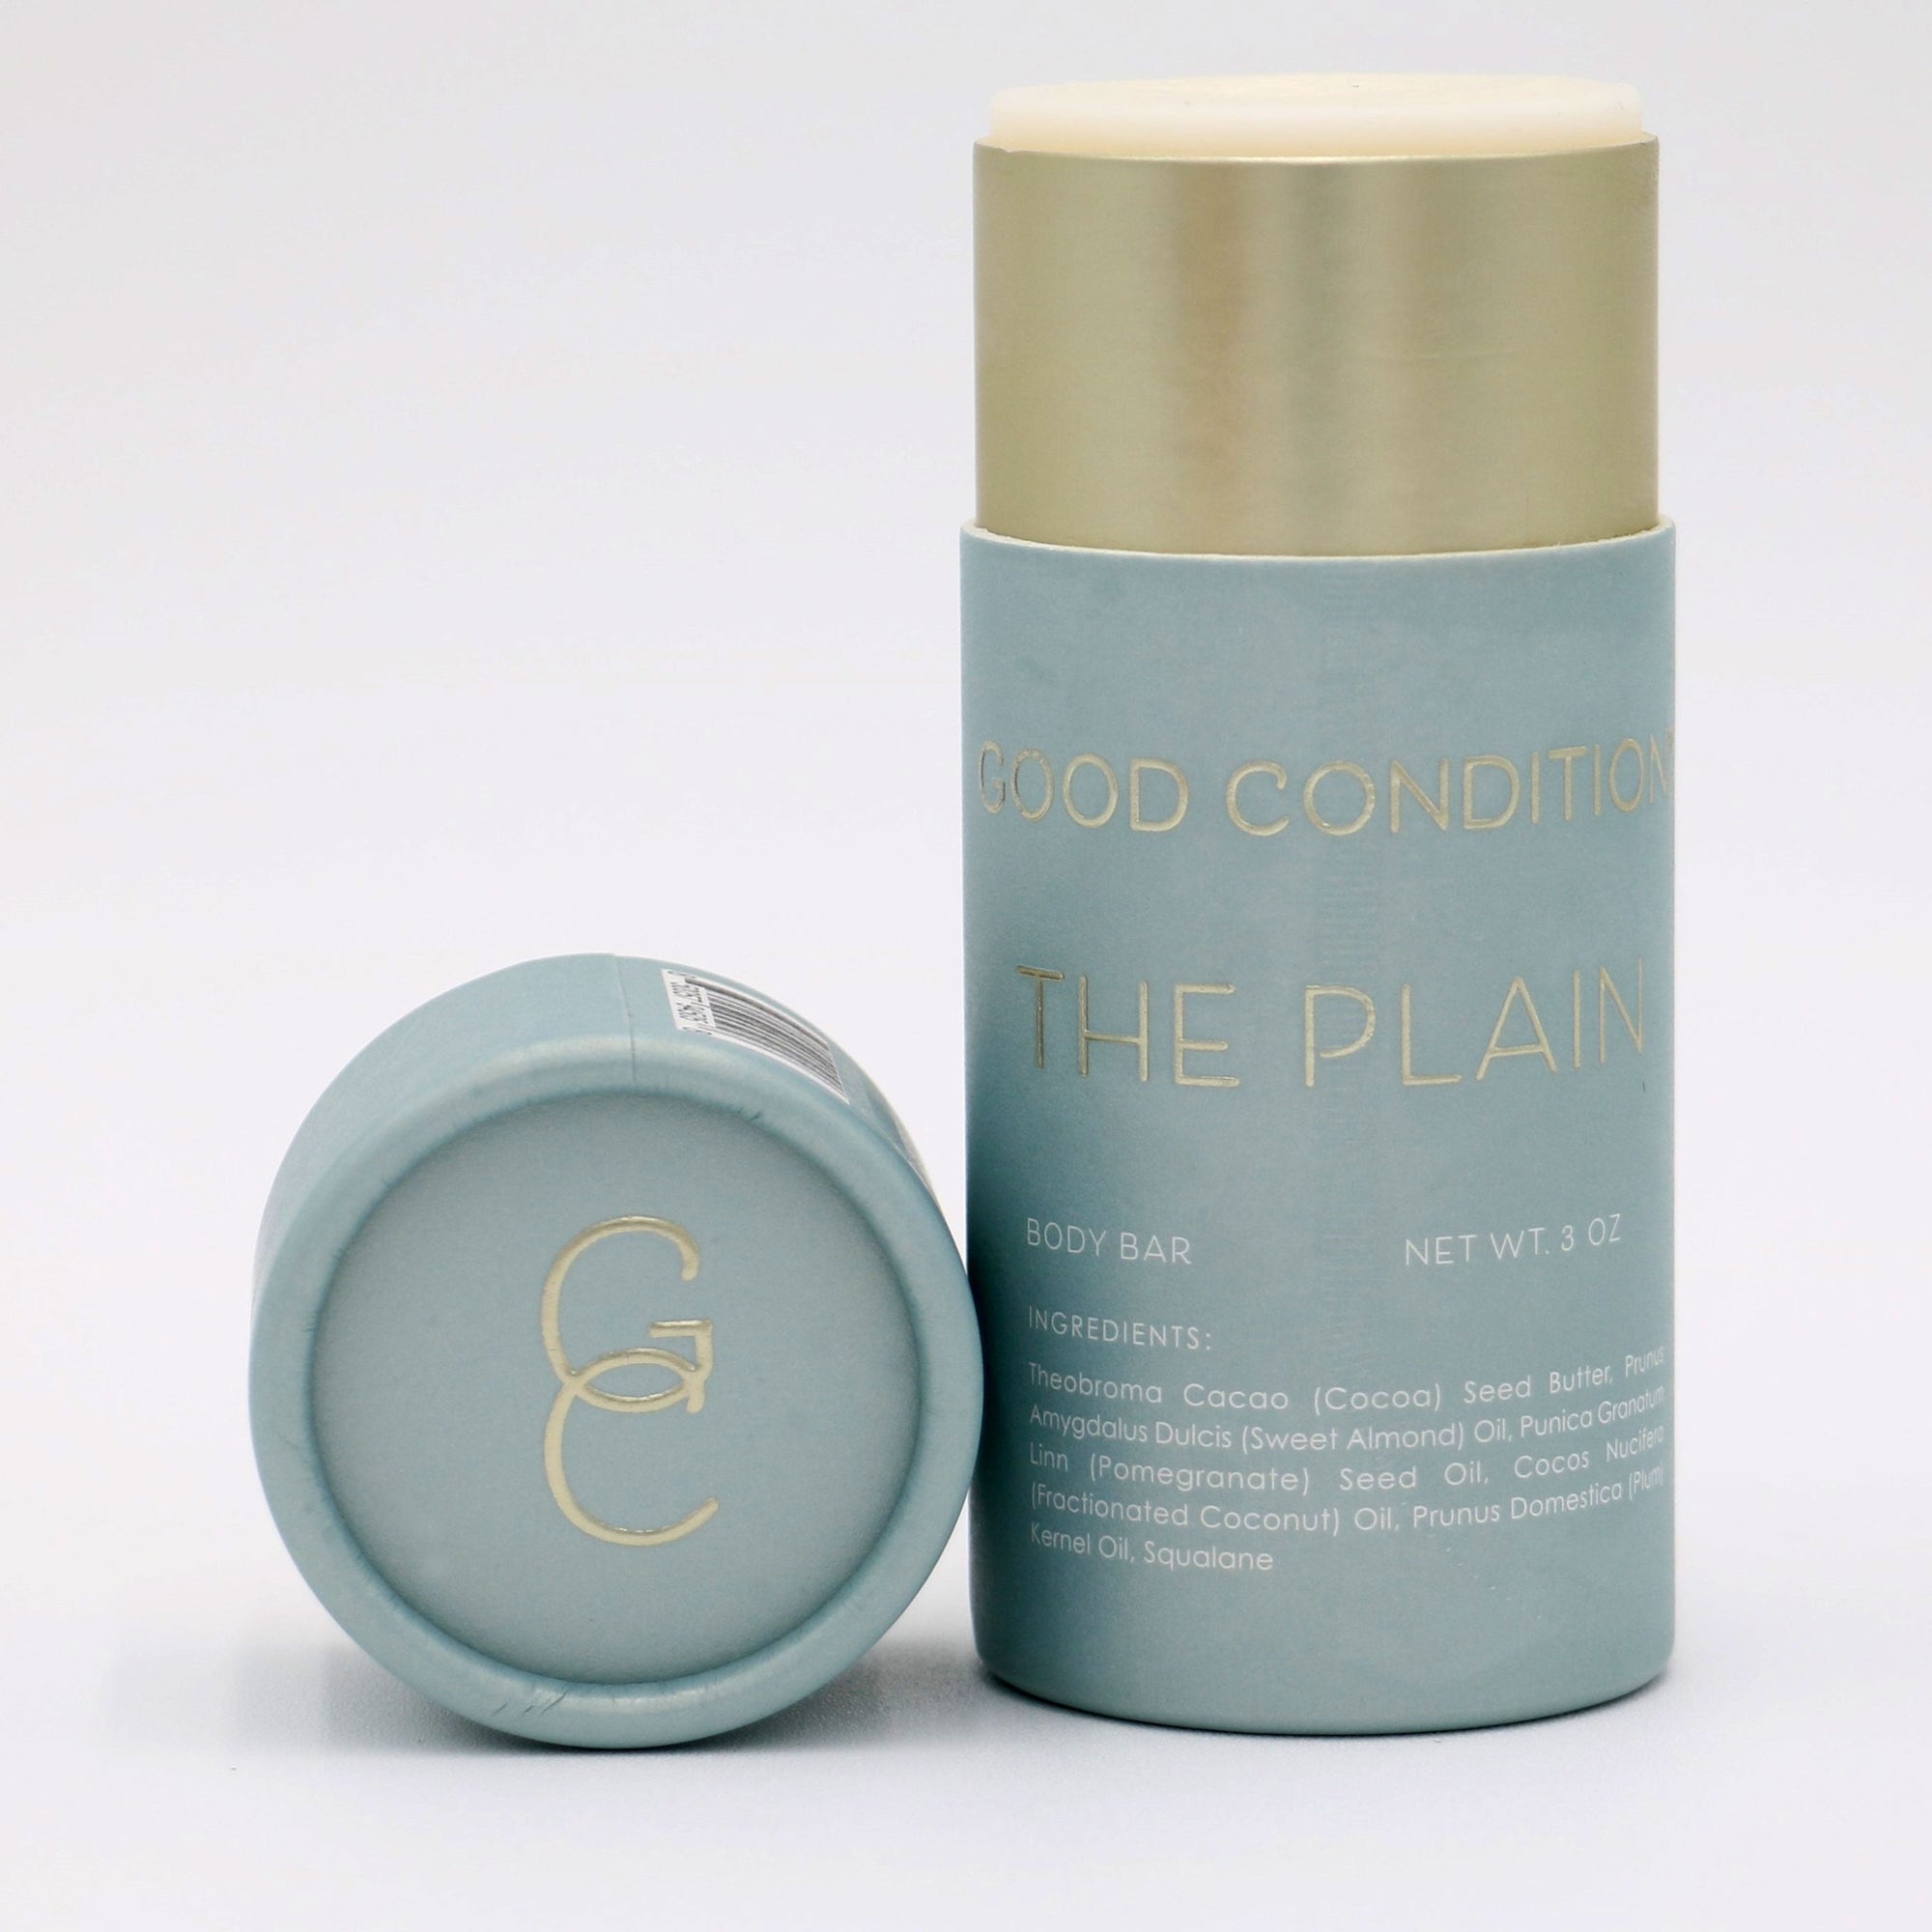 Good Condition The Plain organic cocoa butter body moisturizer tube. Made with sweet almond oil, pomegranate seed oil, plum kernel oil and squalane.